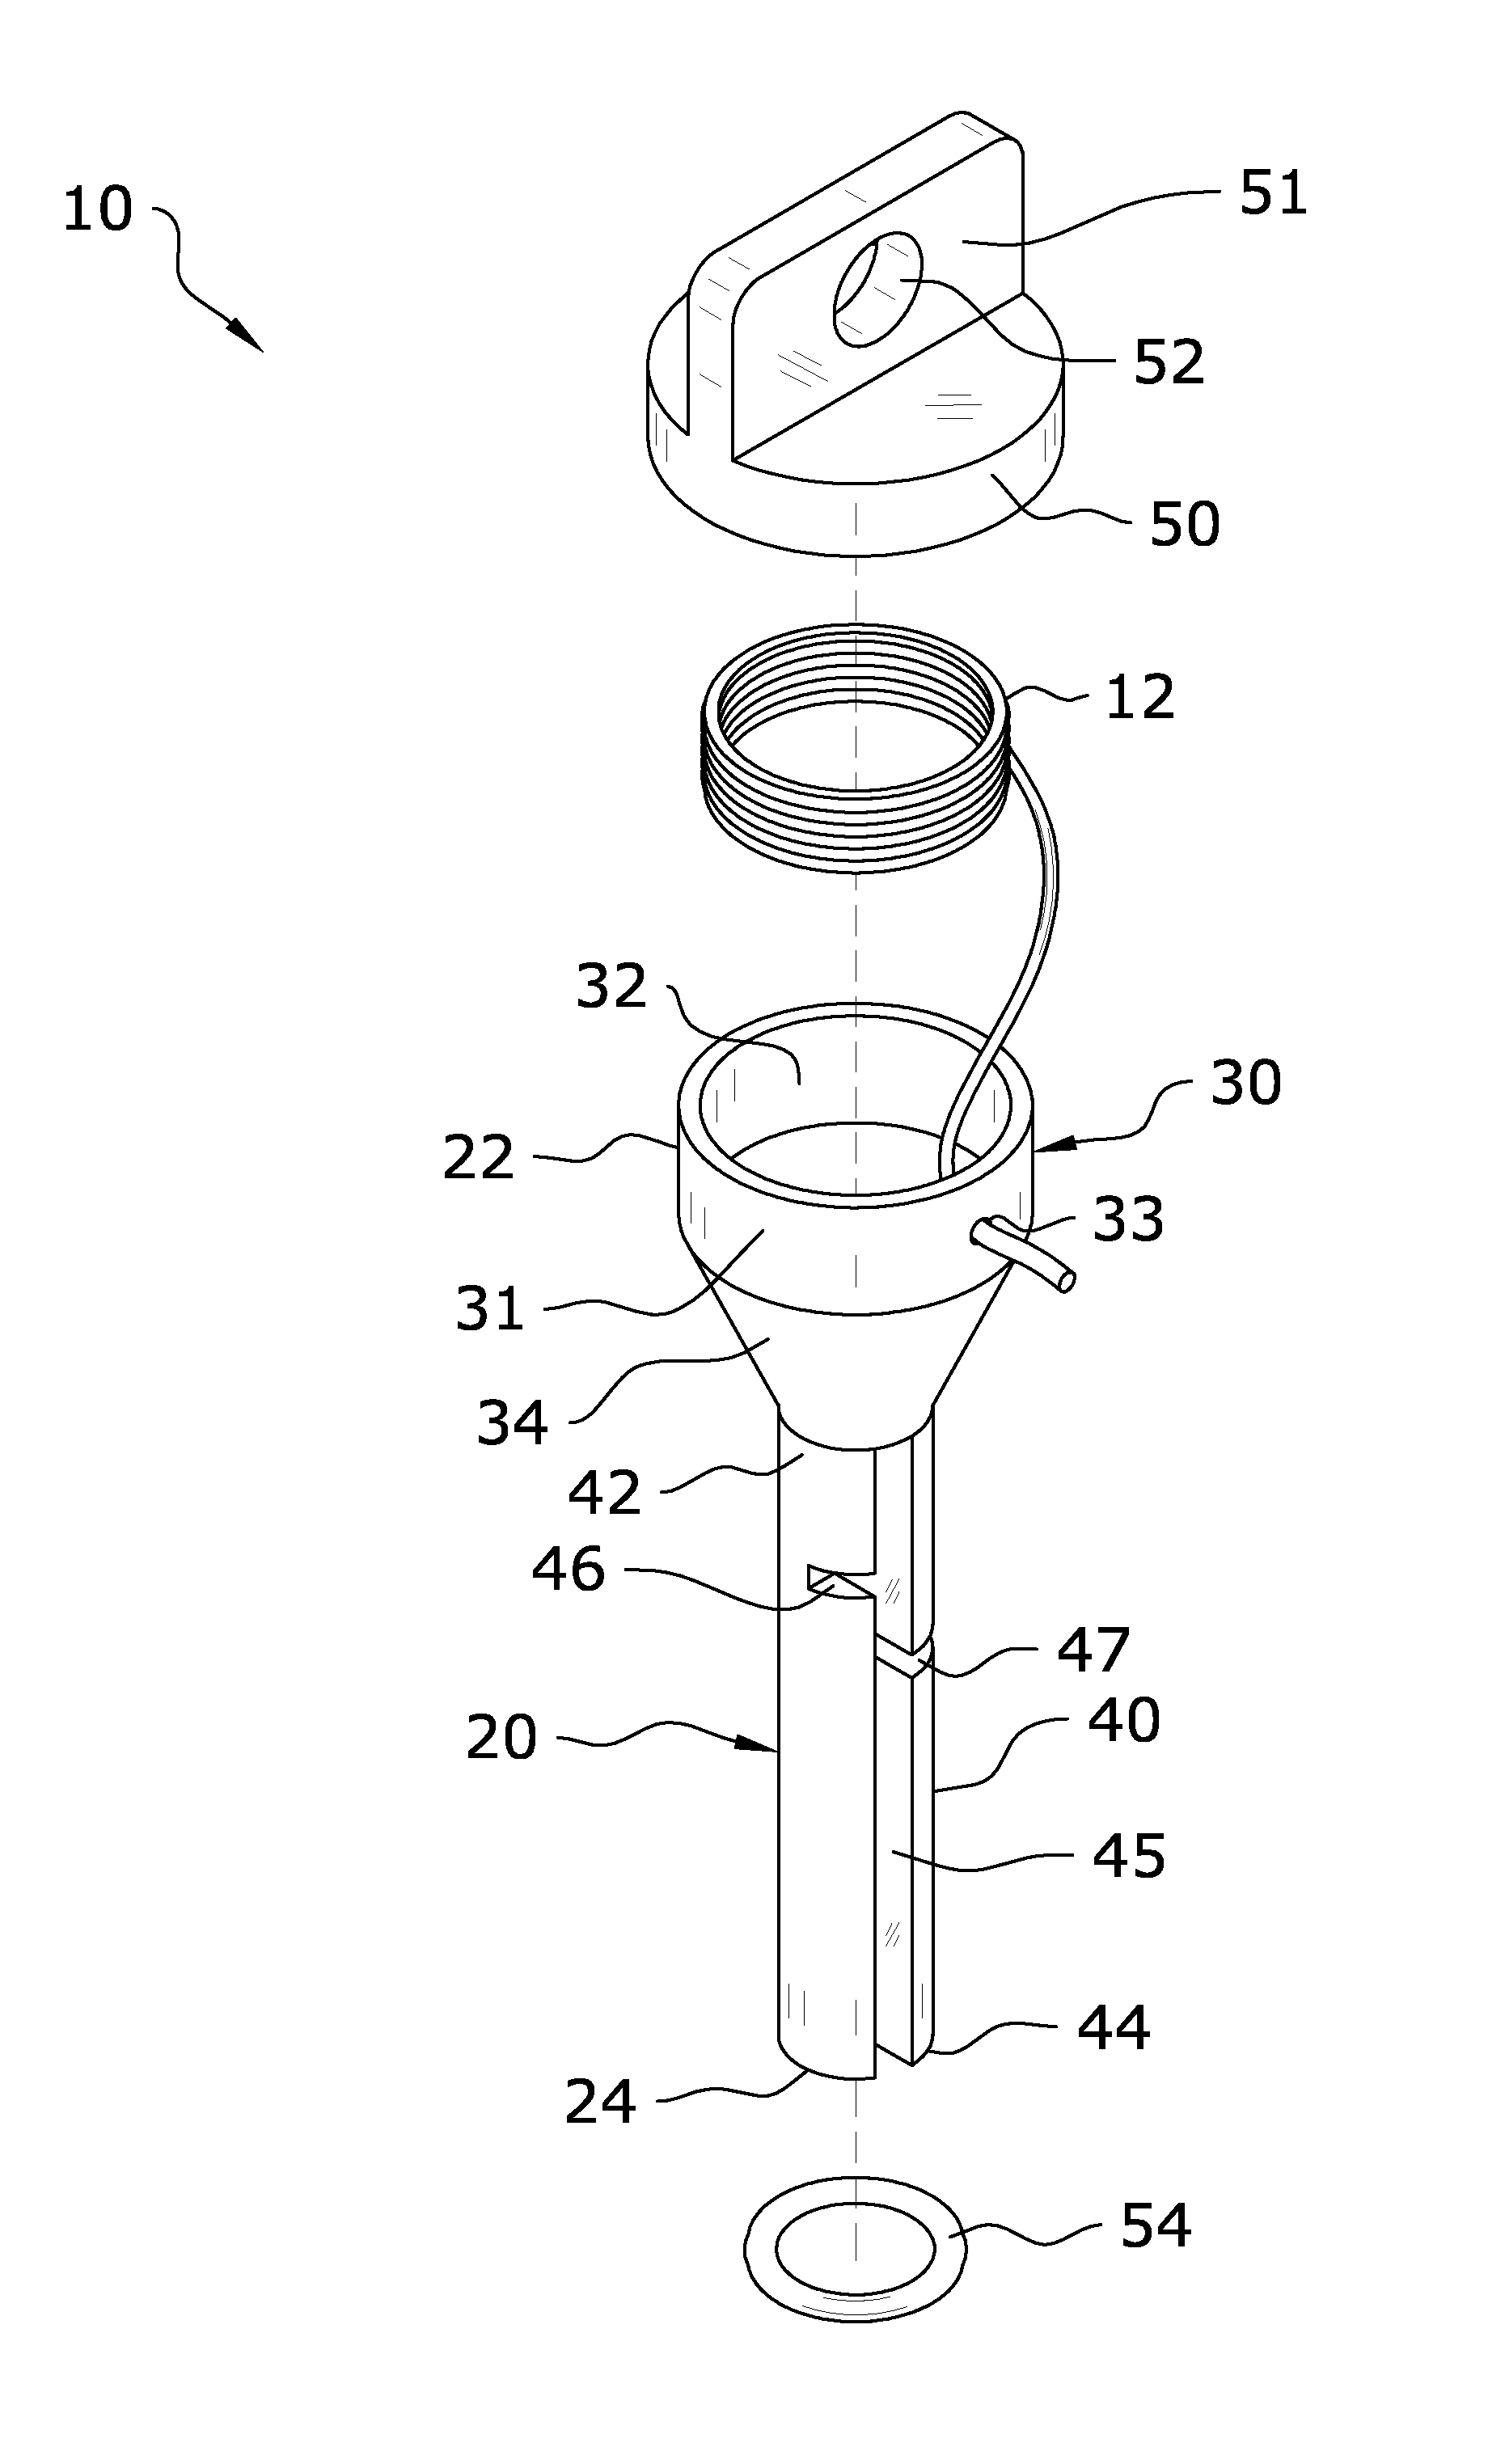 Stop knot tying device